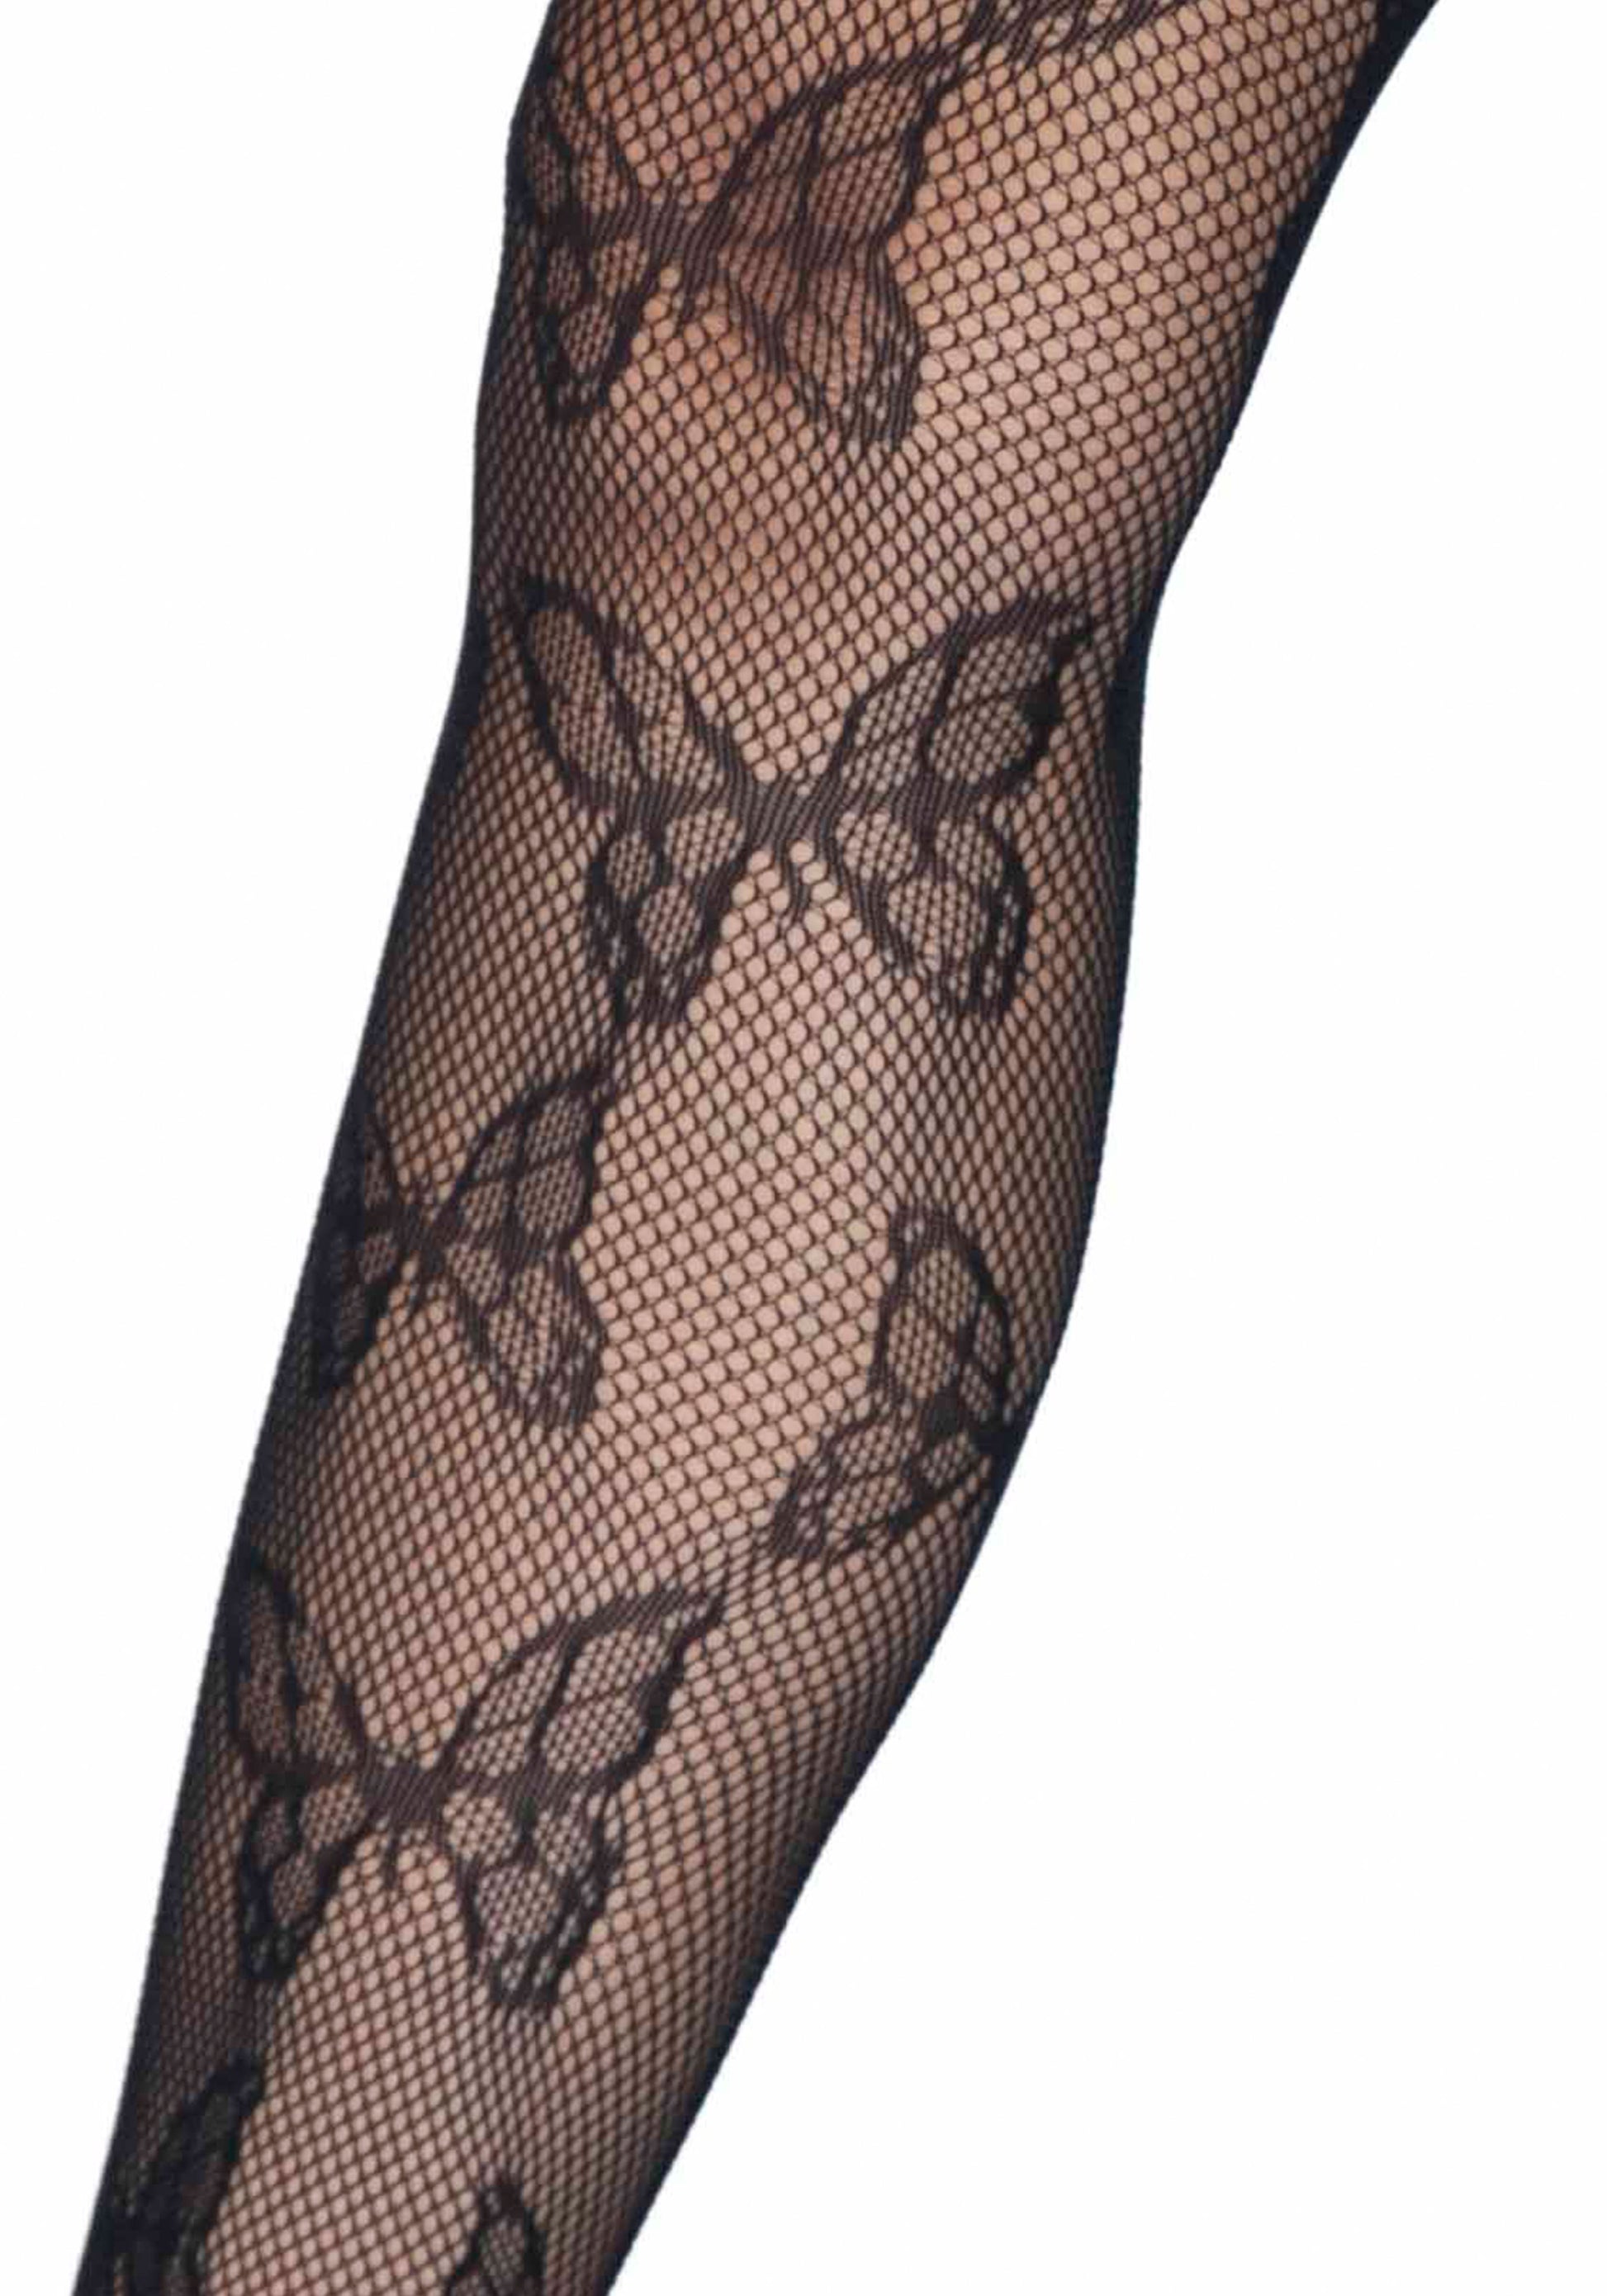 Leg Avenue 1412 Butterfly Net Tights - Black fishnet tights with woven butterfly pattern.